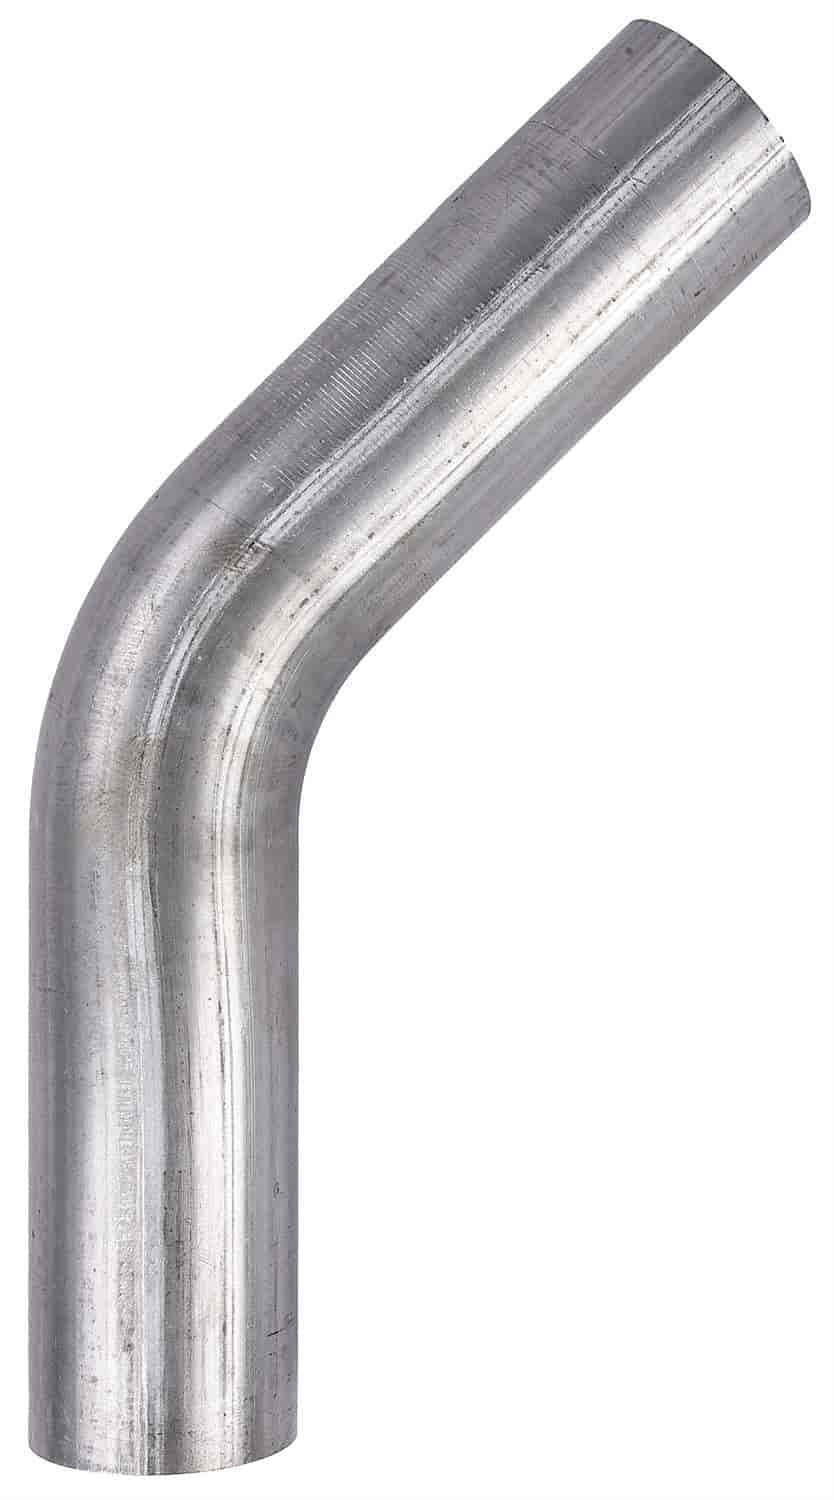 Exhaust Elbow Aluminized Steel [45-Degree Bend, 3.500 in. Outer Diameter]